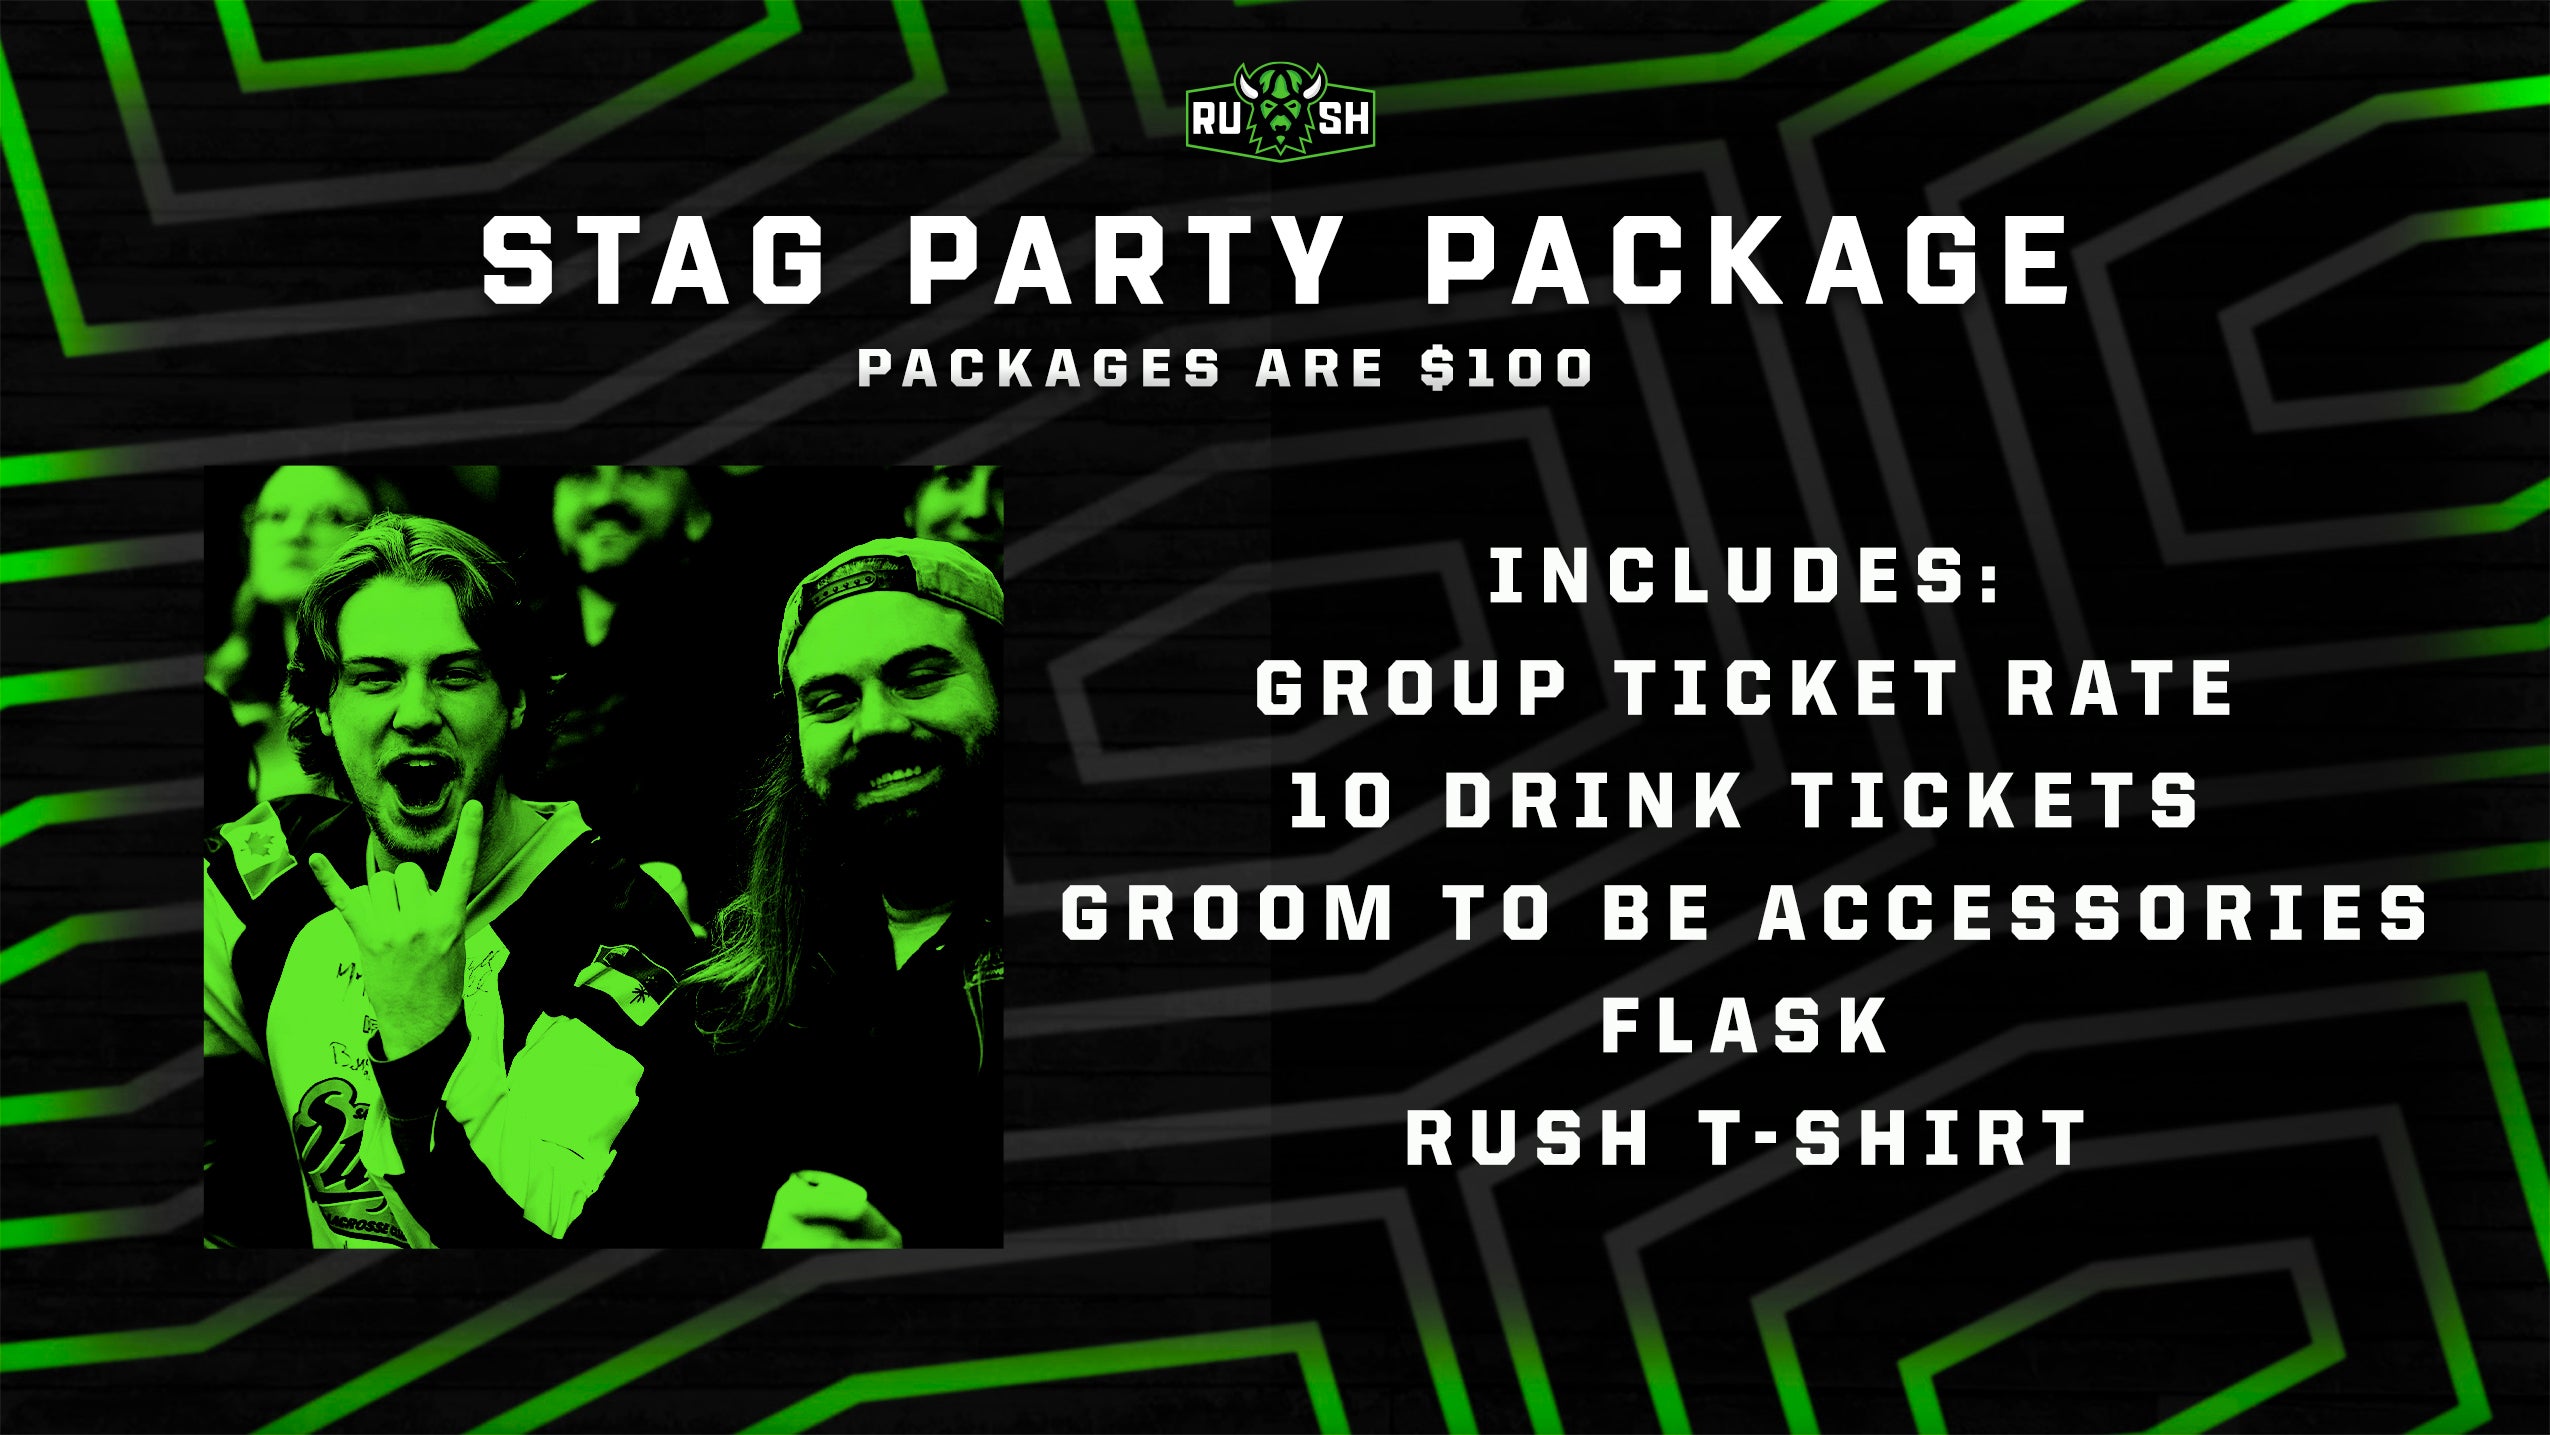 Stag Party Package.jpg